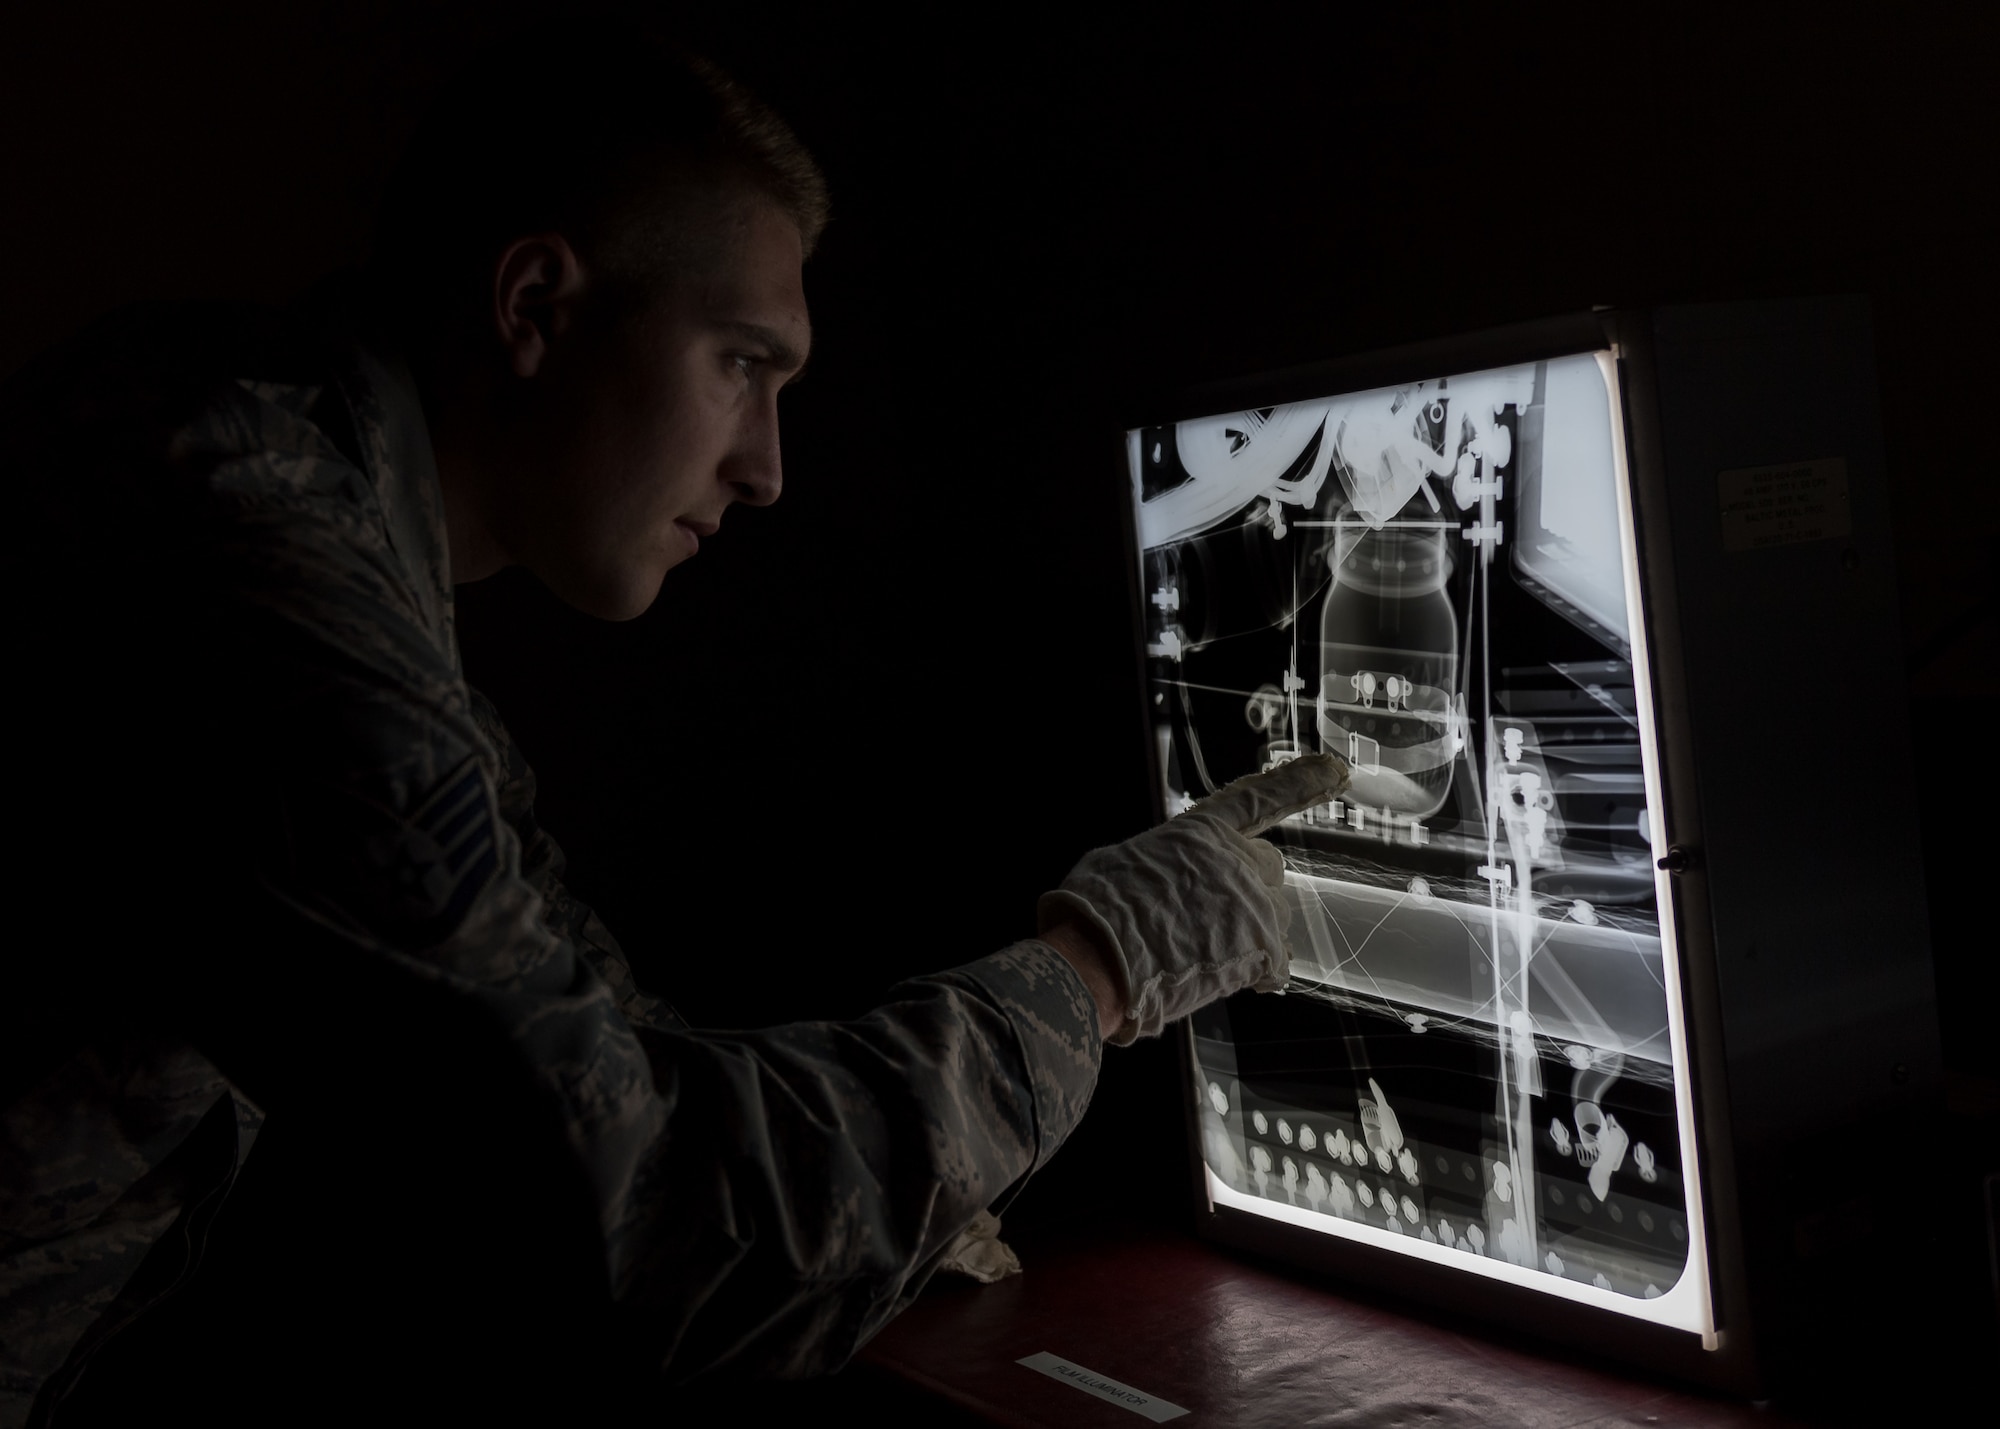 Staff Sgt. Tanner Wentworth, a Nondestructive Inspection Technician of the 101st Air Refueling Wing, Bangor Maine, studies an x-ray, June 25, 2018. The x-rays help detect faults in aircraft and equipment. (U.S. Air National Guard photo by Staff Sgt. Michelle Hopkins)